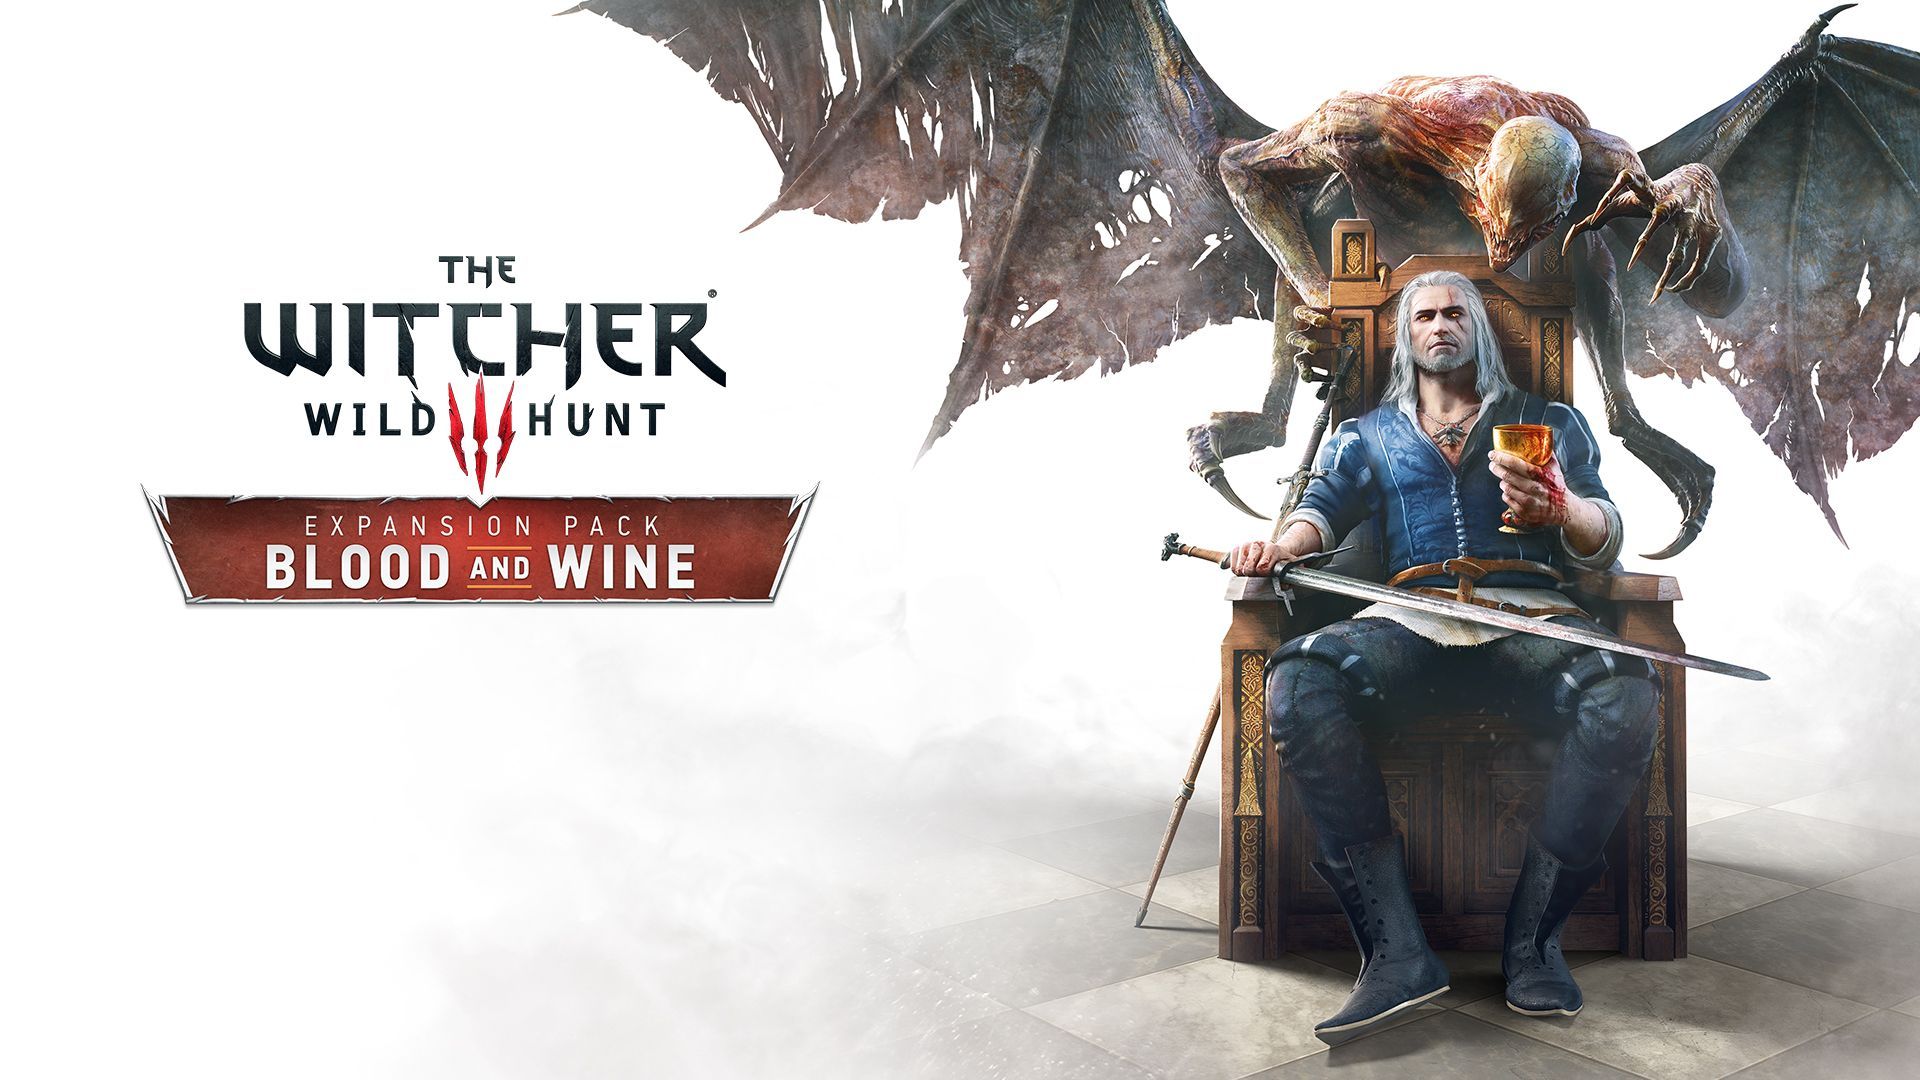 The Witcher 3: Wild Hunt GOG discounts. The witcher, The witcher wild hunt, The witcher 3